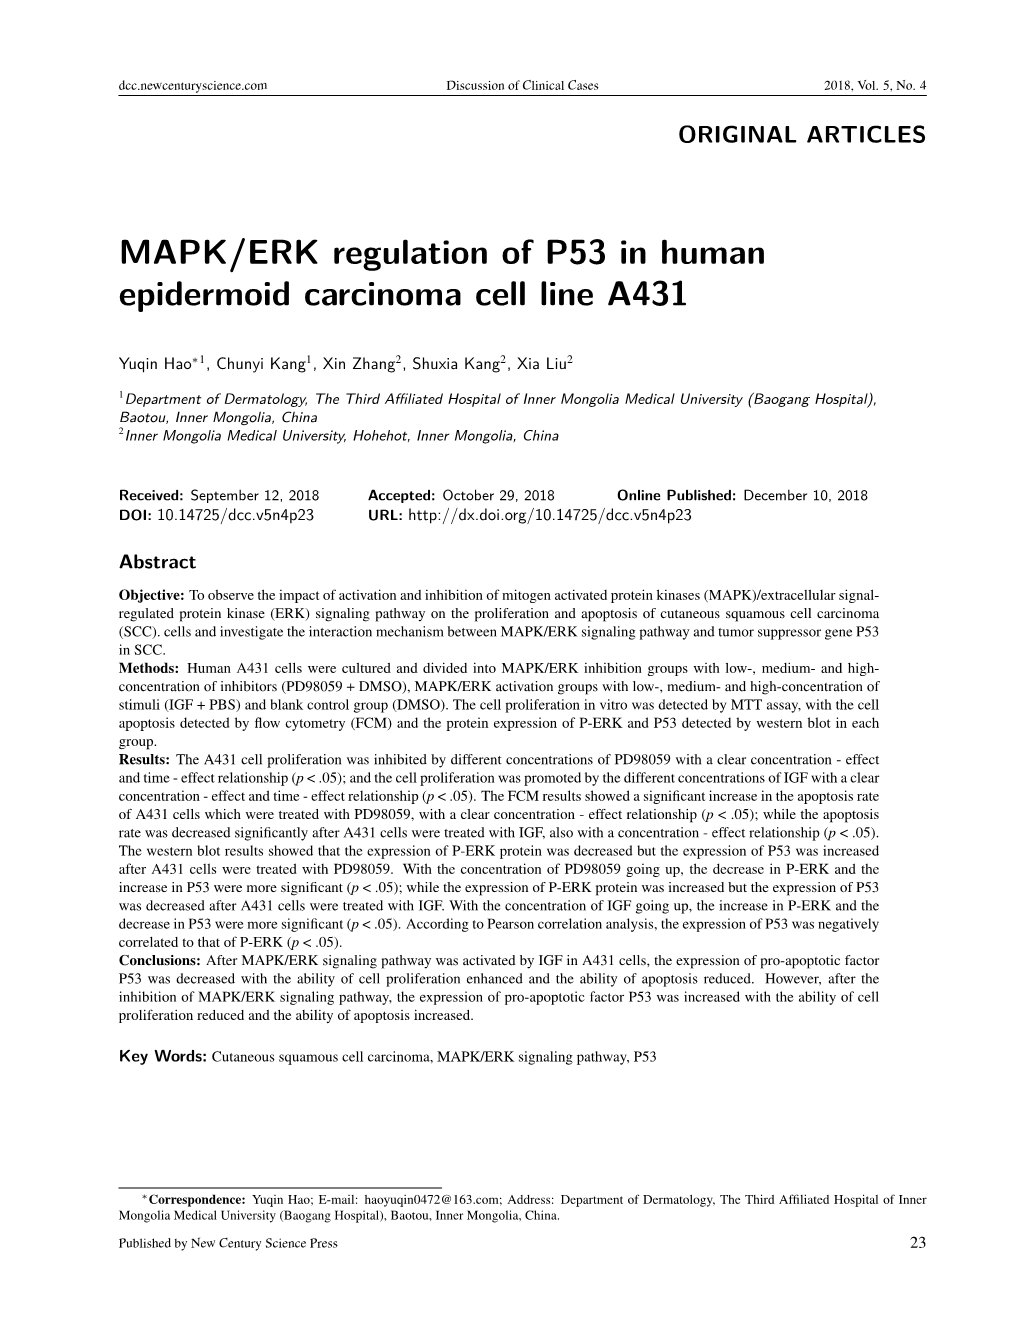 MAPK/ERK Regulation of P53 in Human Epidermoid Carcinoma Cell Line A431